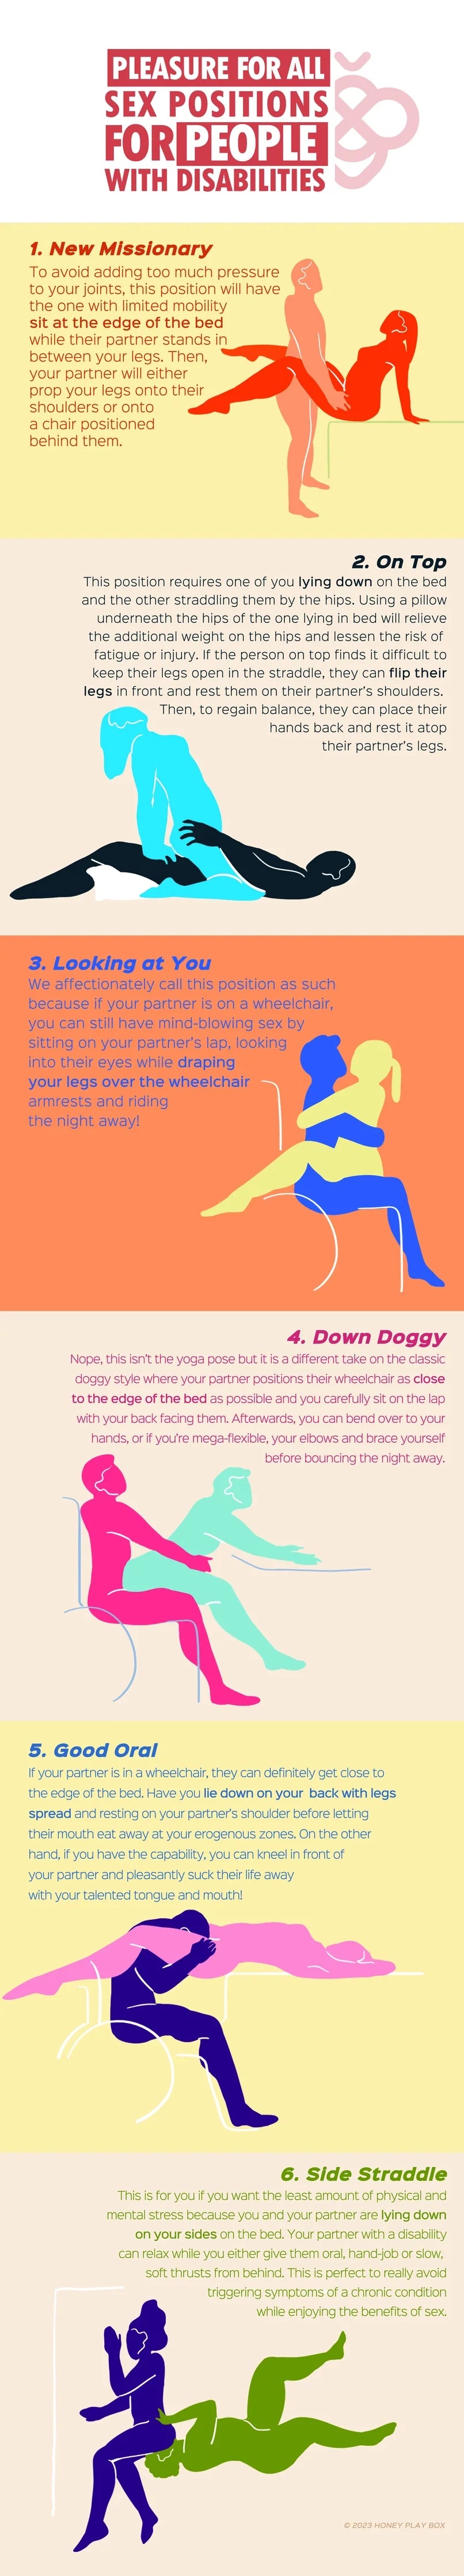 Pleasure_for_All__Sex_Positions_for_People_with_Disabilities